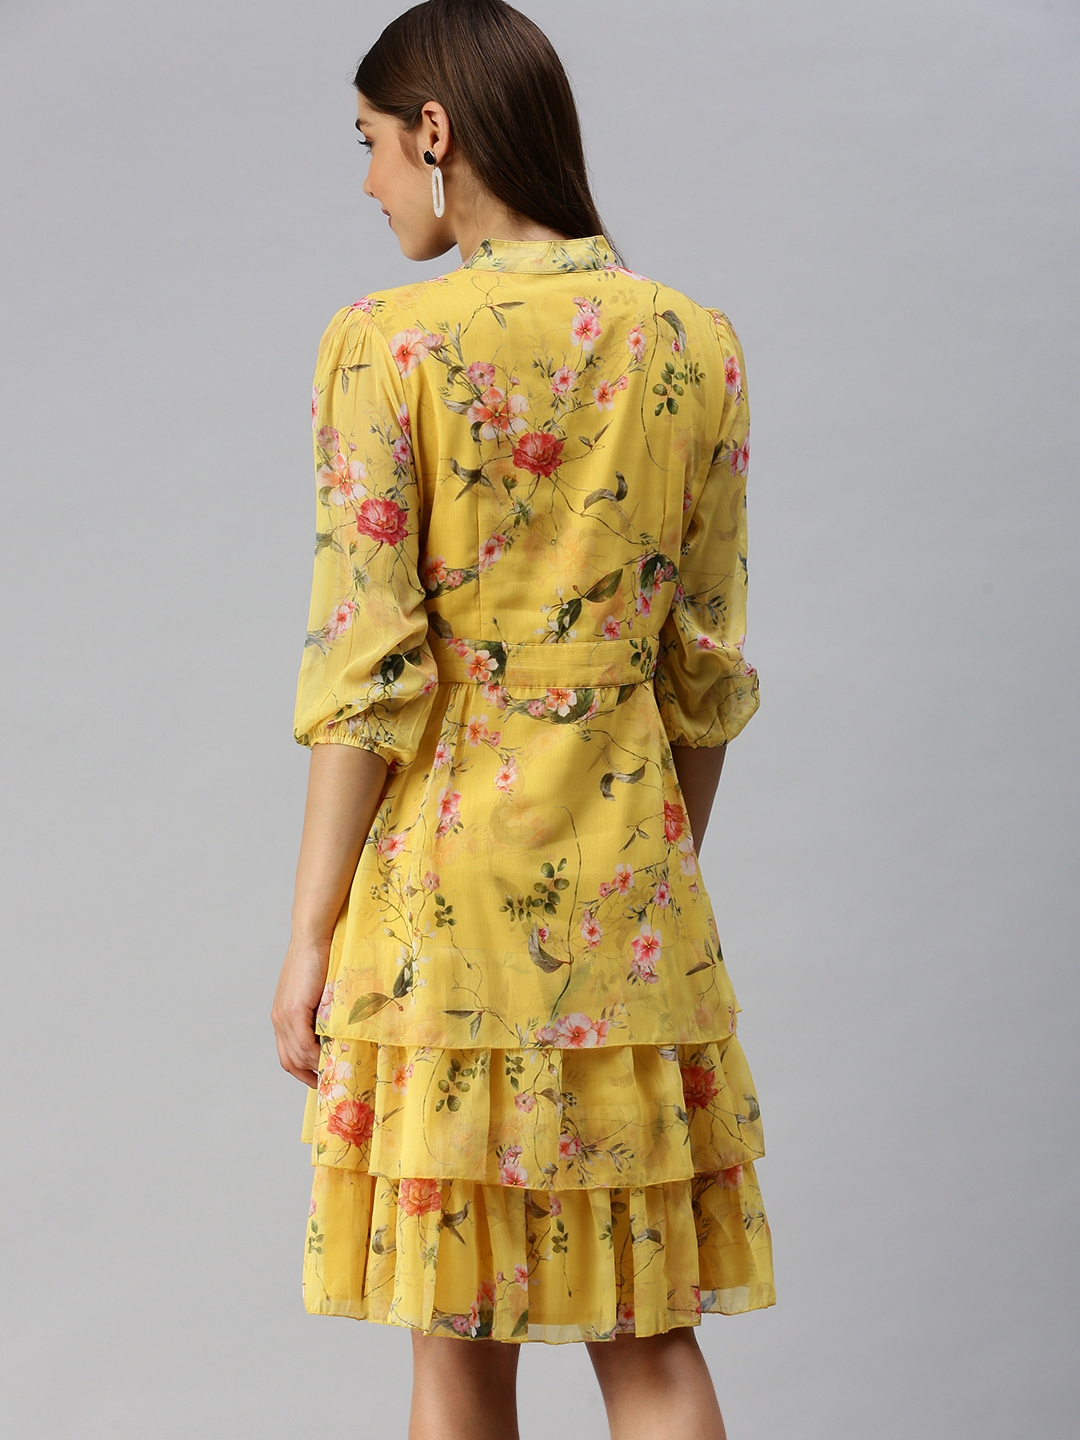 Women's Yellow Polyester Printed Dresses